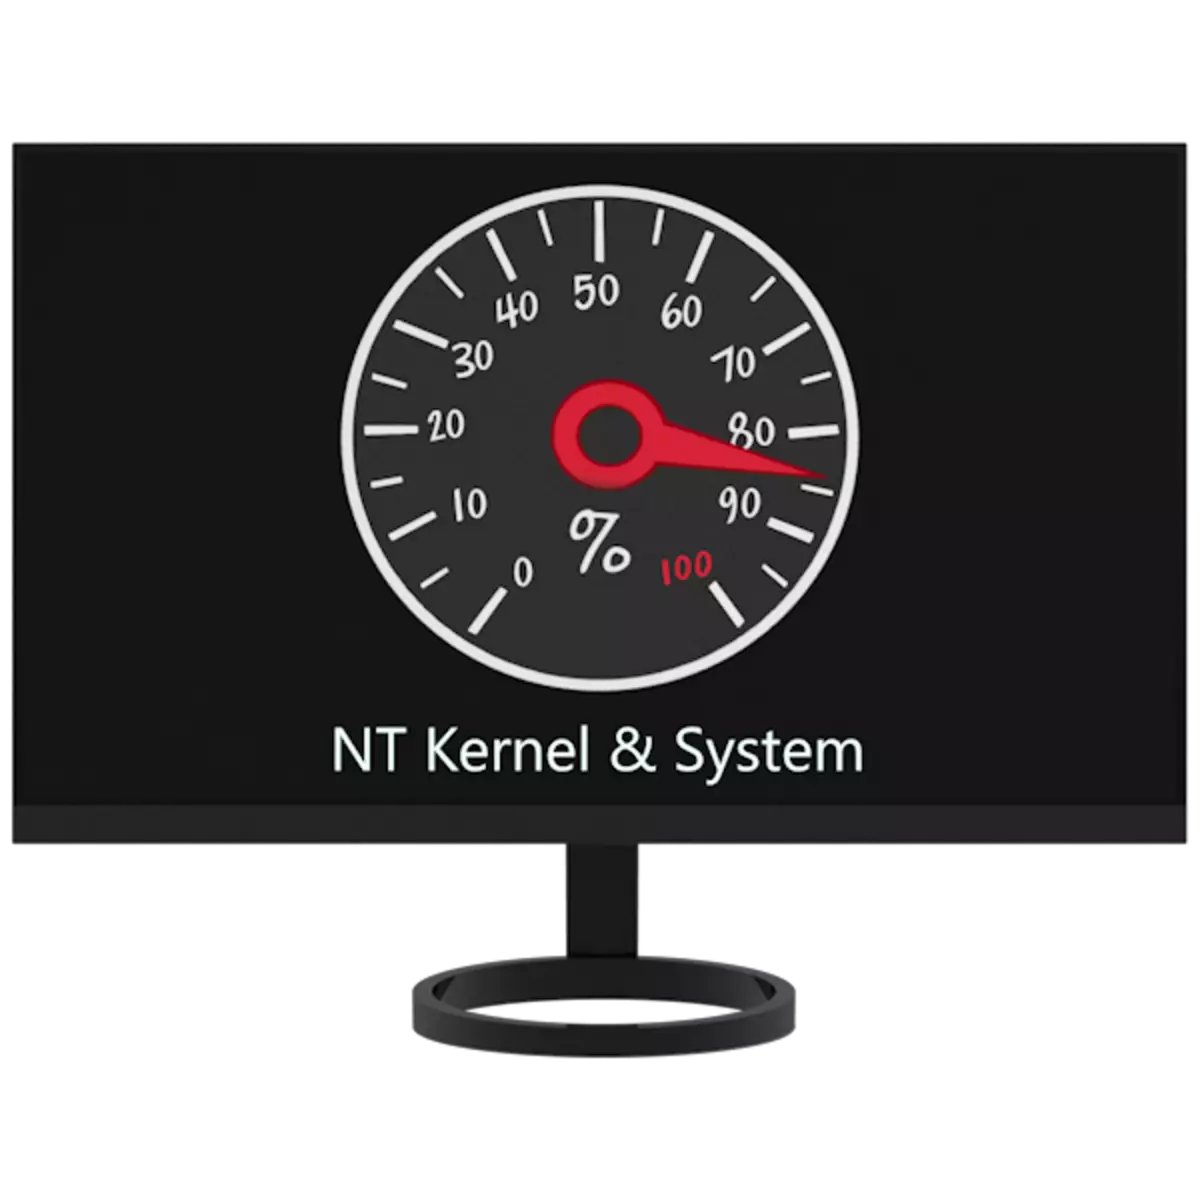 NT Kernel & System Surgical Windows 7-systeem